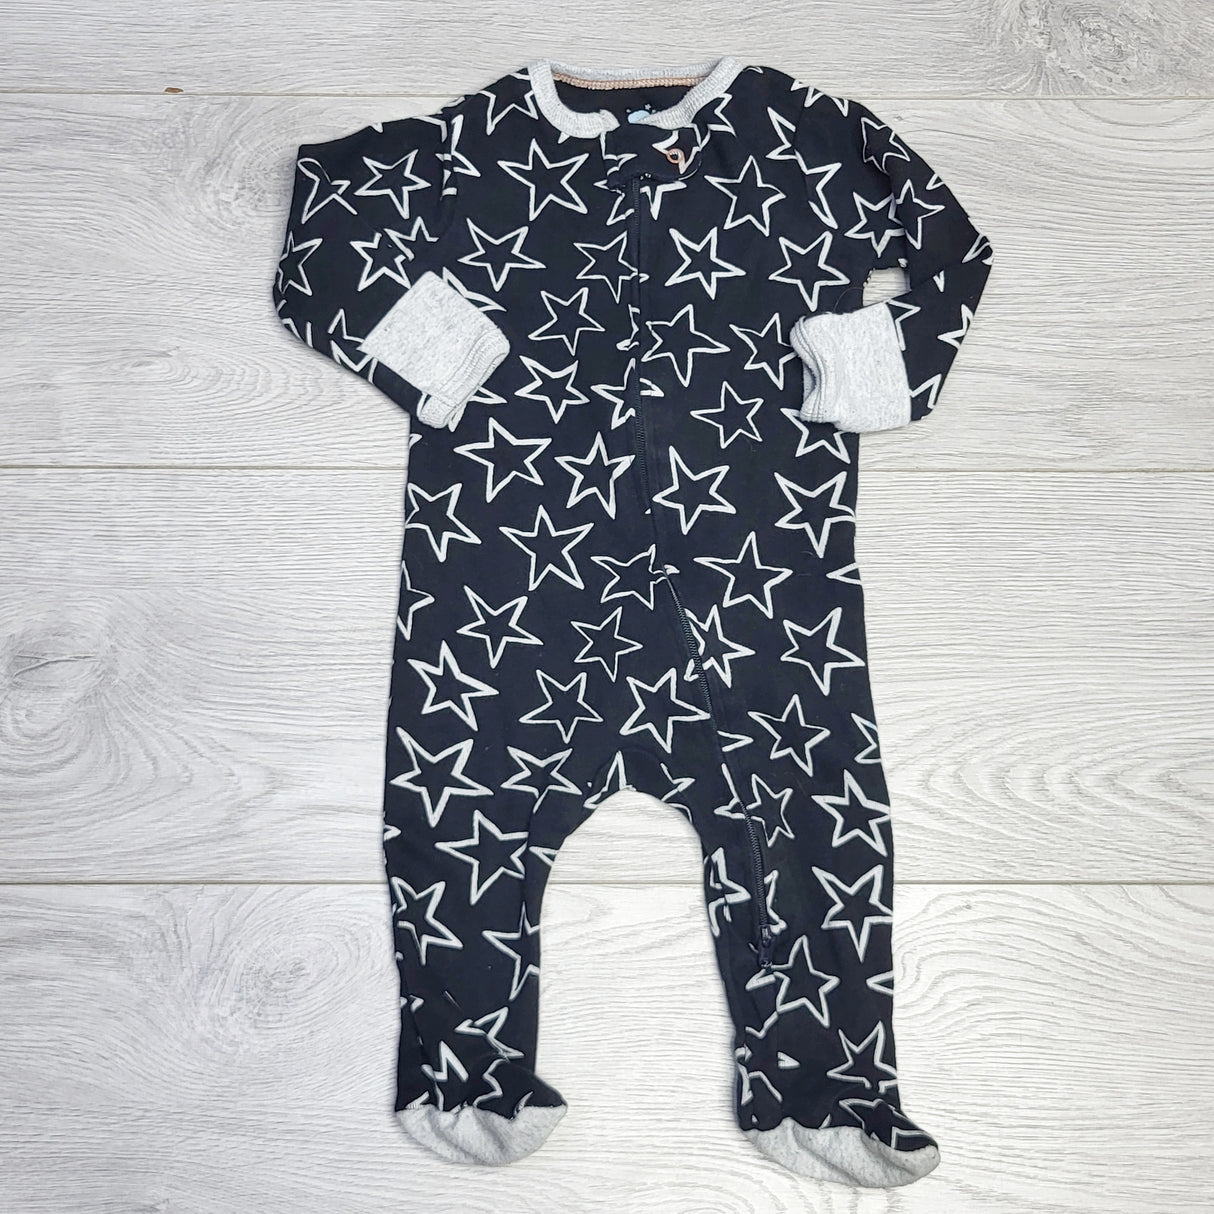 CRTH1 - Cloud Island black cotton sleeper with stars. Size 3-6 months